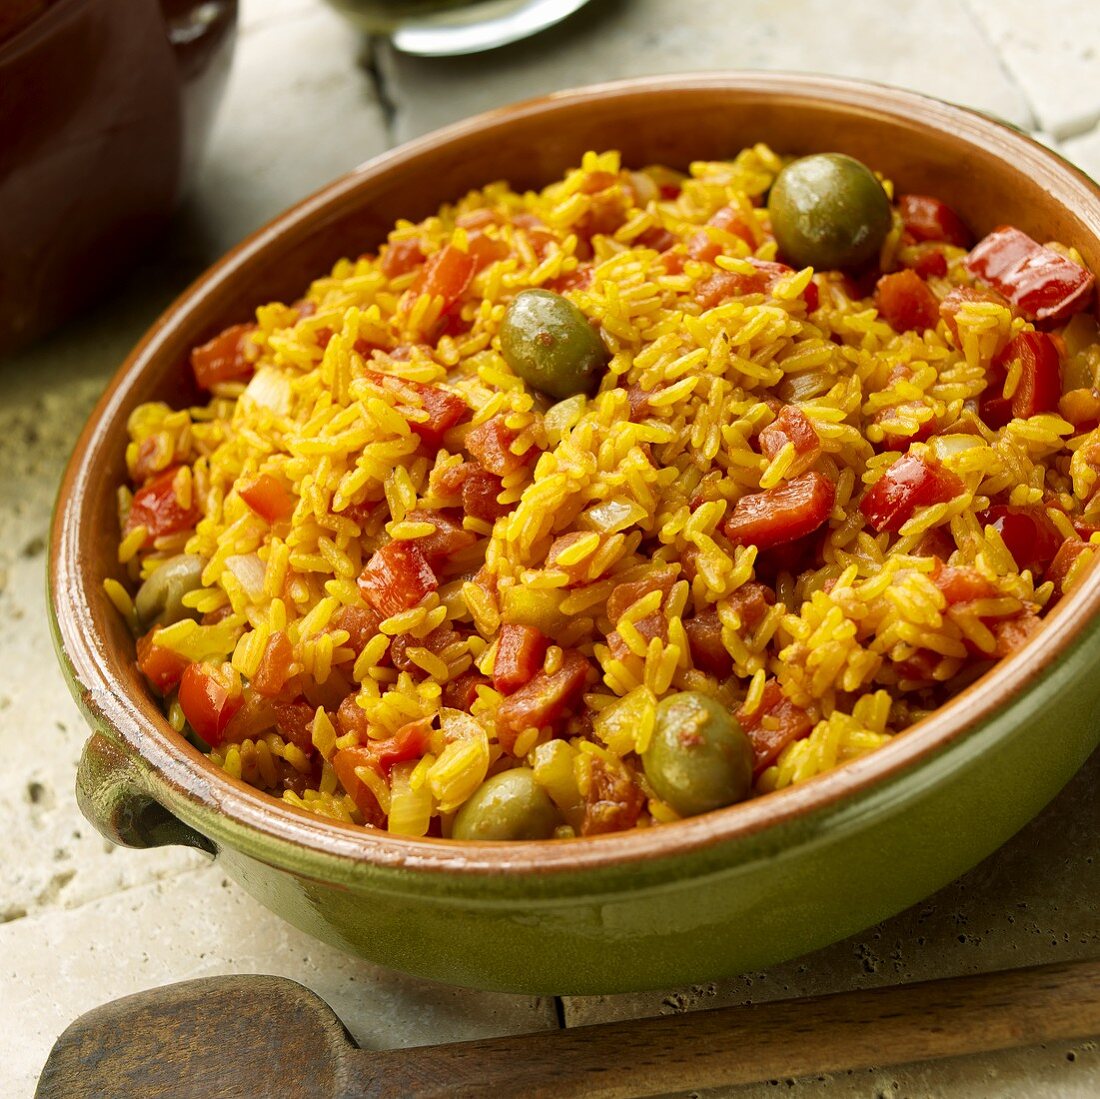 Spanish Rice with Green Olives, Red Peppers and Tomatoes in Earthenware Bowl